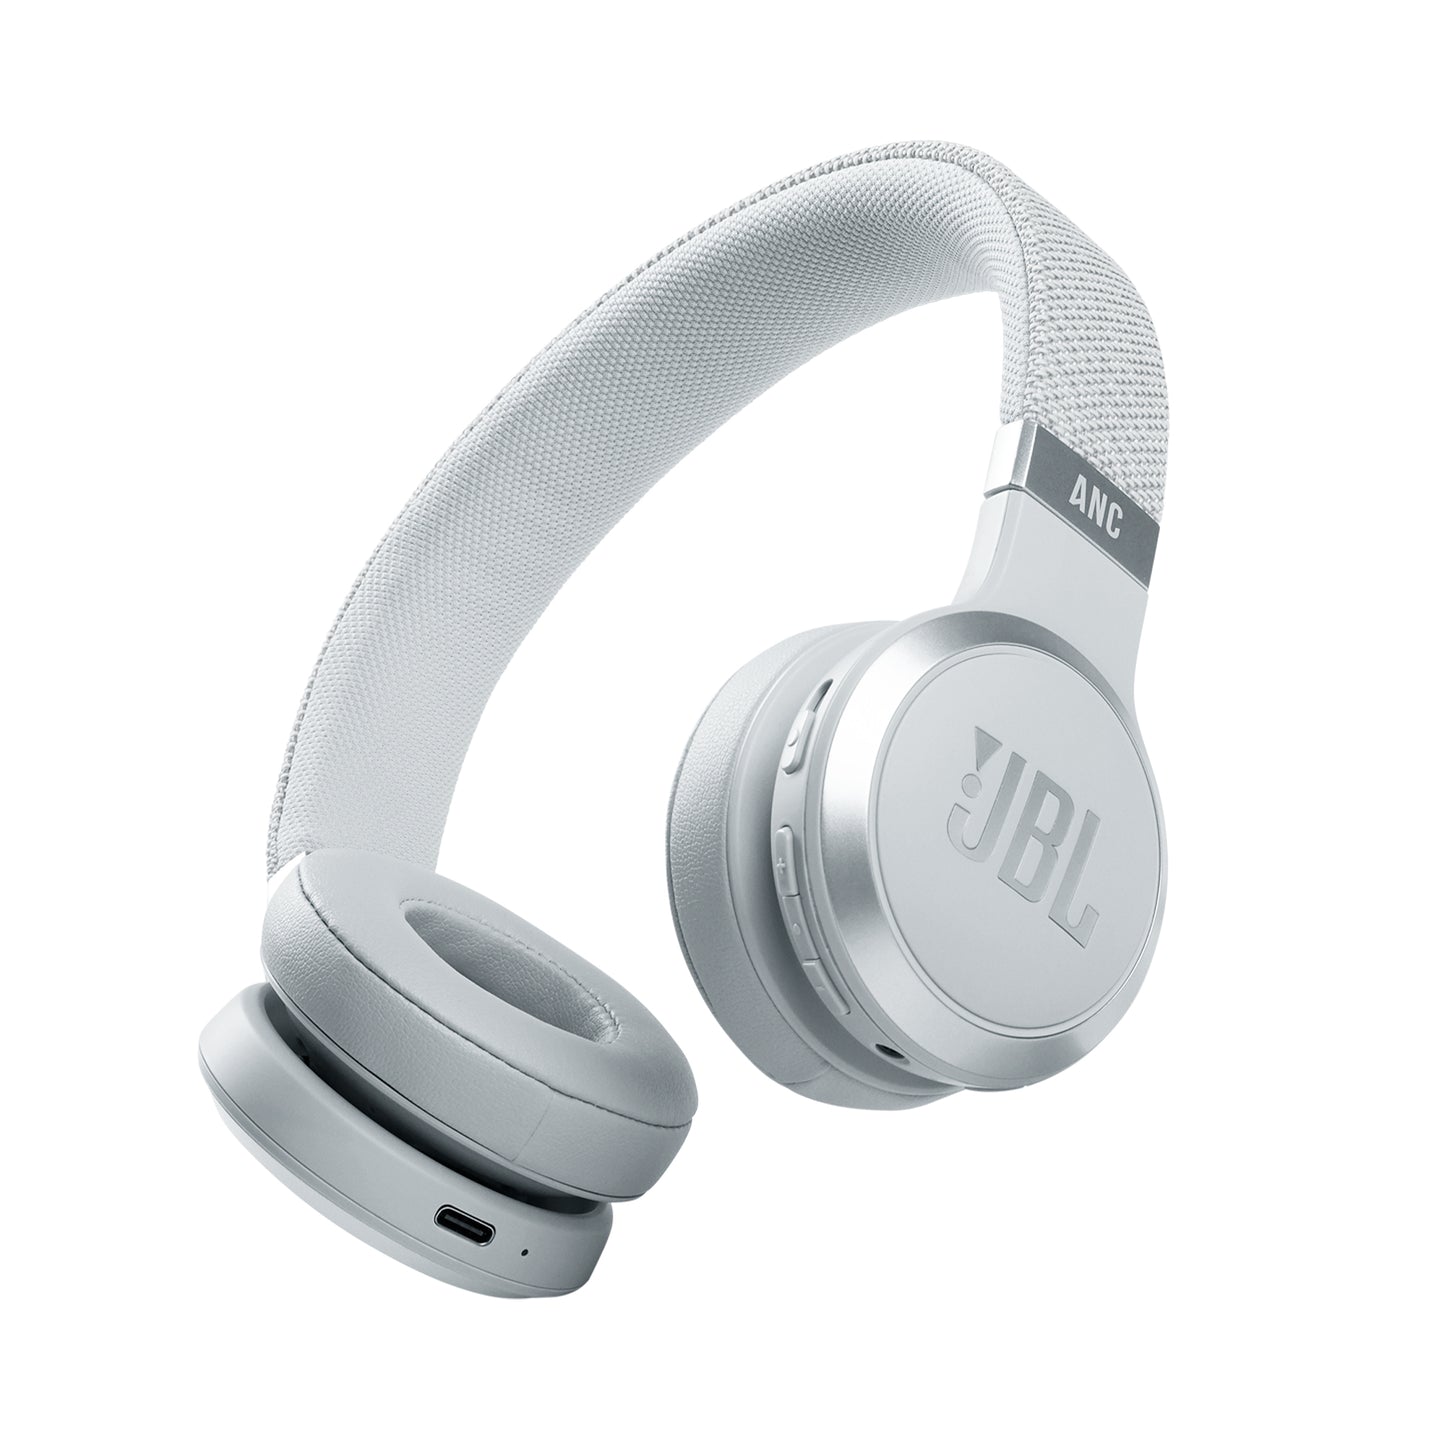 JBL Live 460NC Wireless Noise Cancelling On-Ear Headphones - White